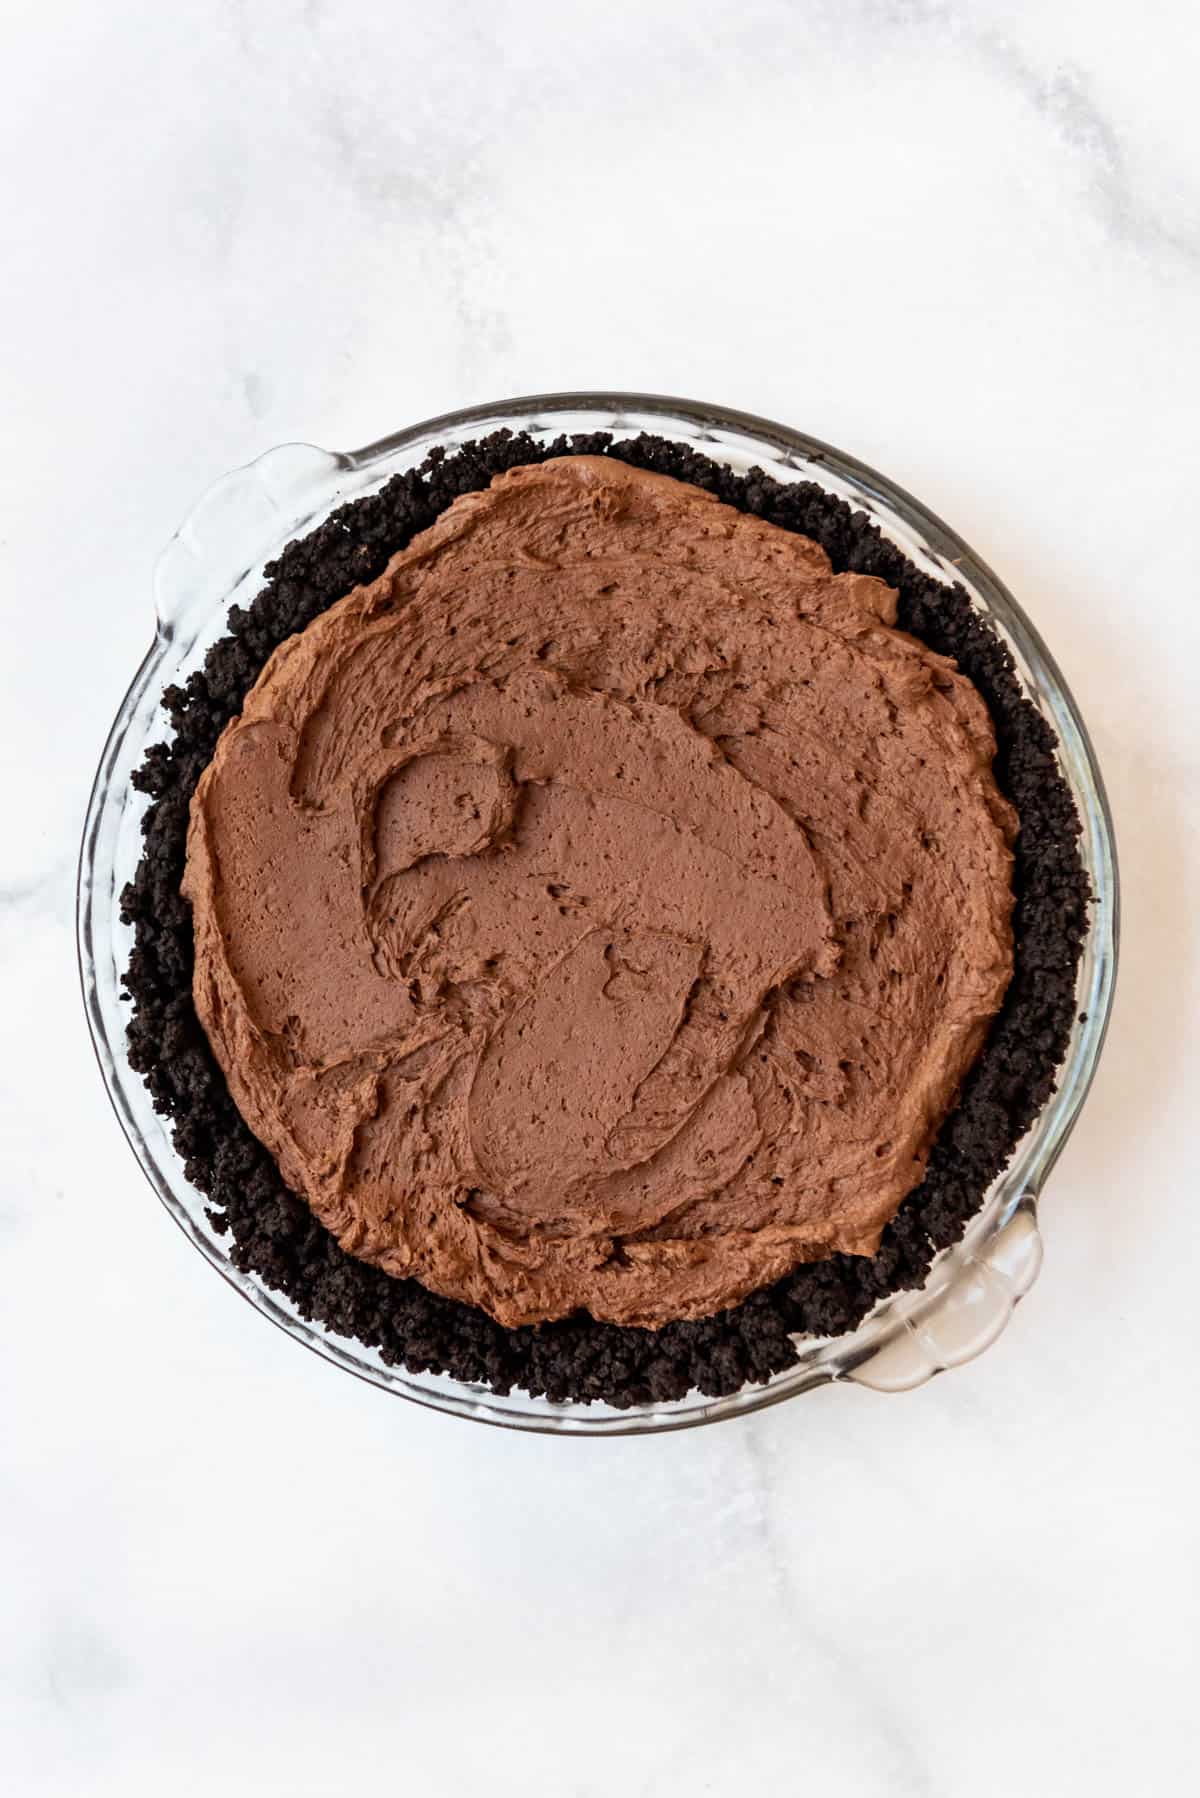 The chocolate mousse layer spread onto a Mississippi mud pie.